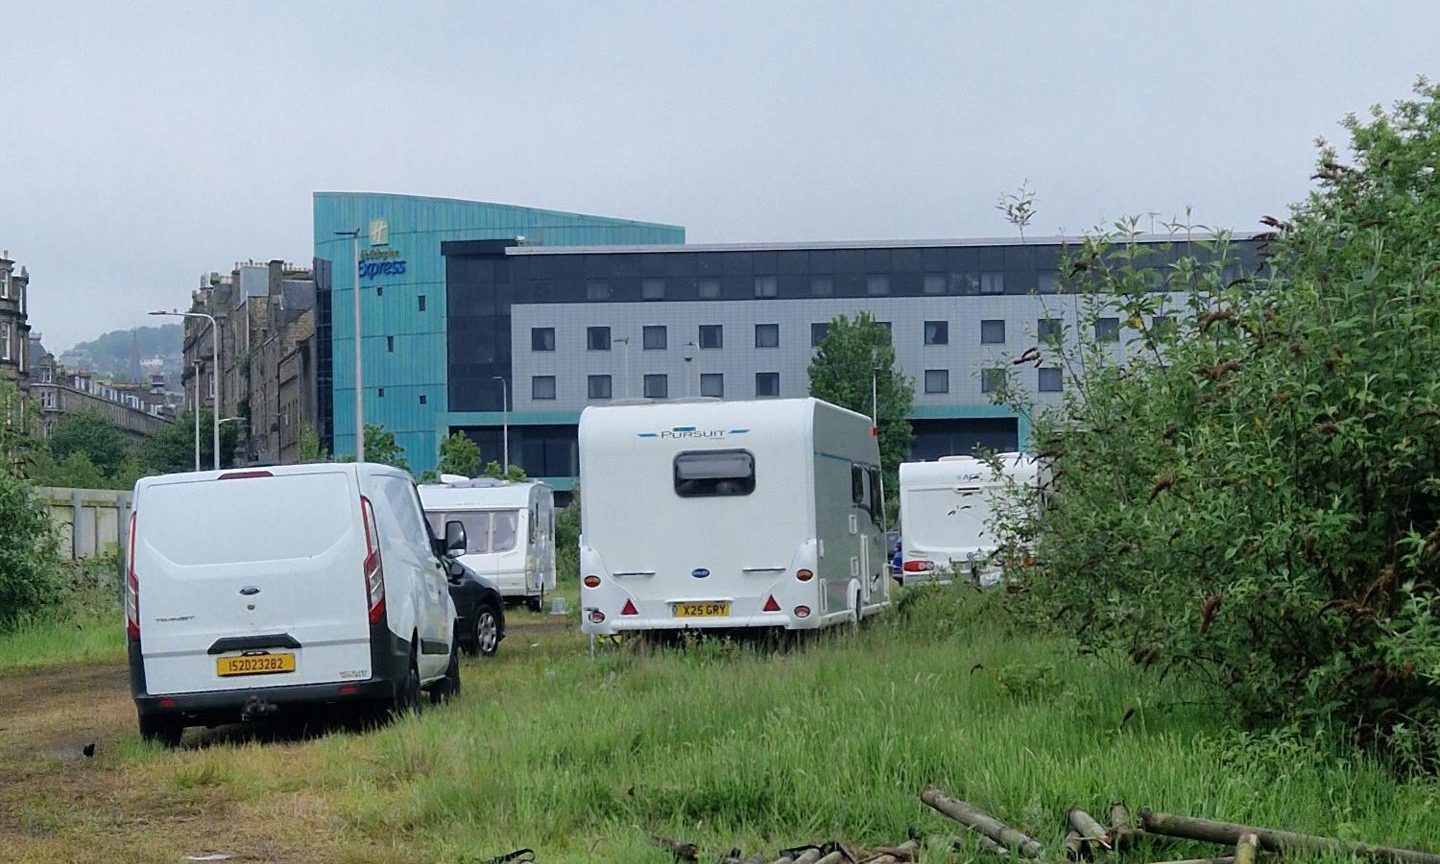 Caravans at the site opposite the Apex Hotel.